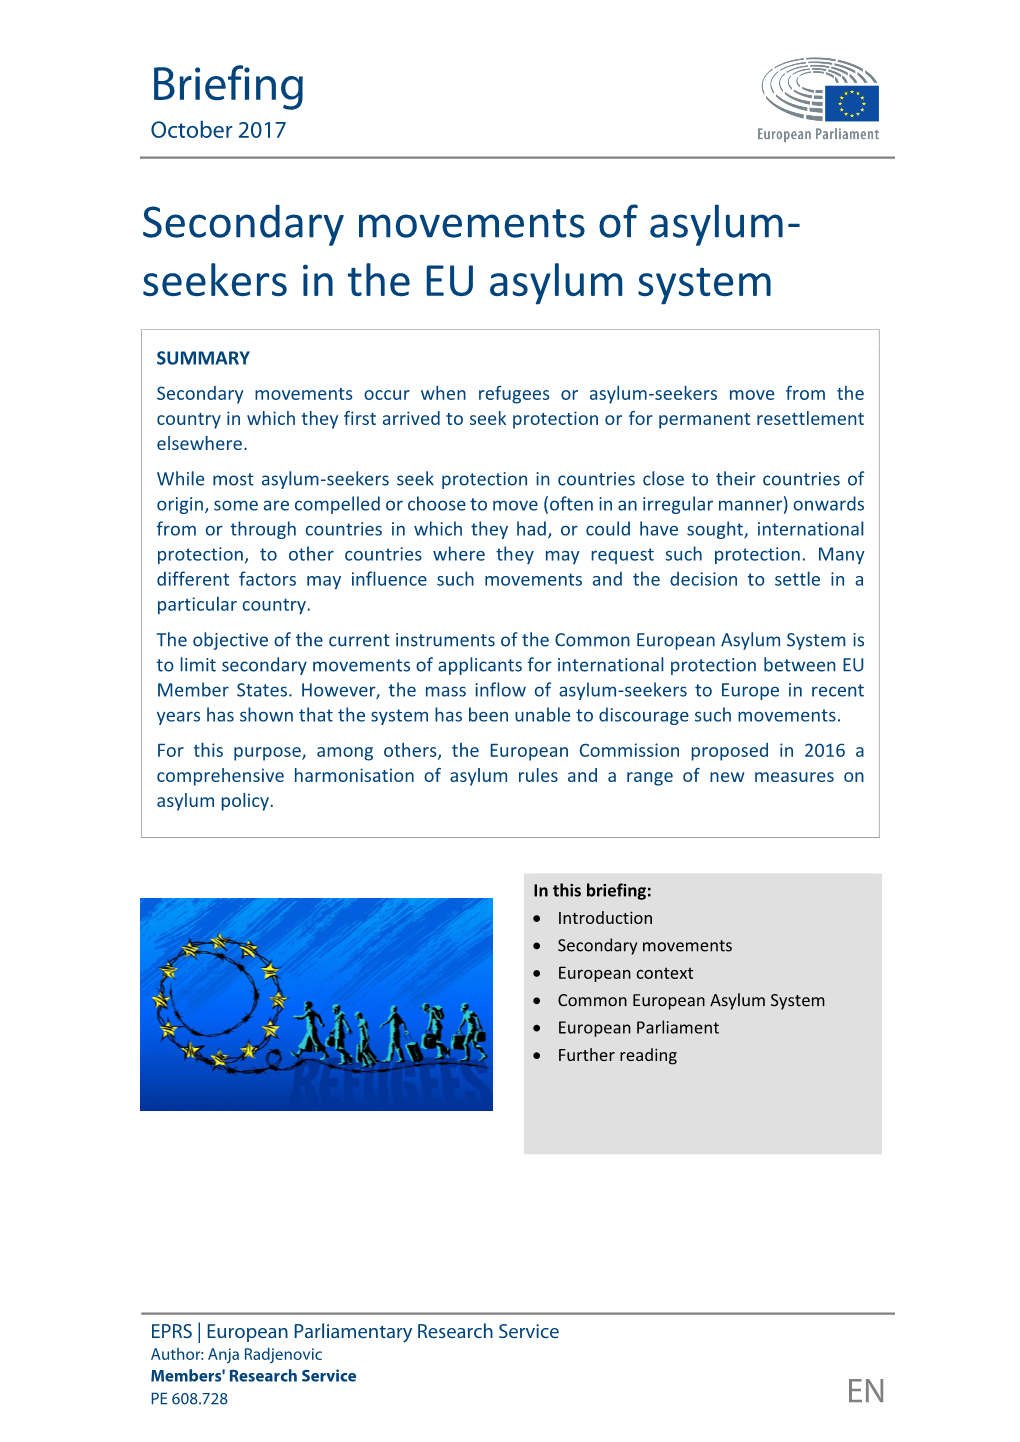 Secondary Movements of Asylum-Seekers in the EU